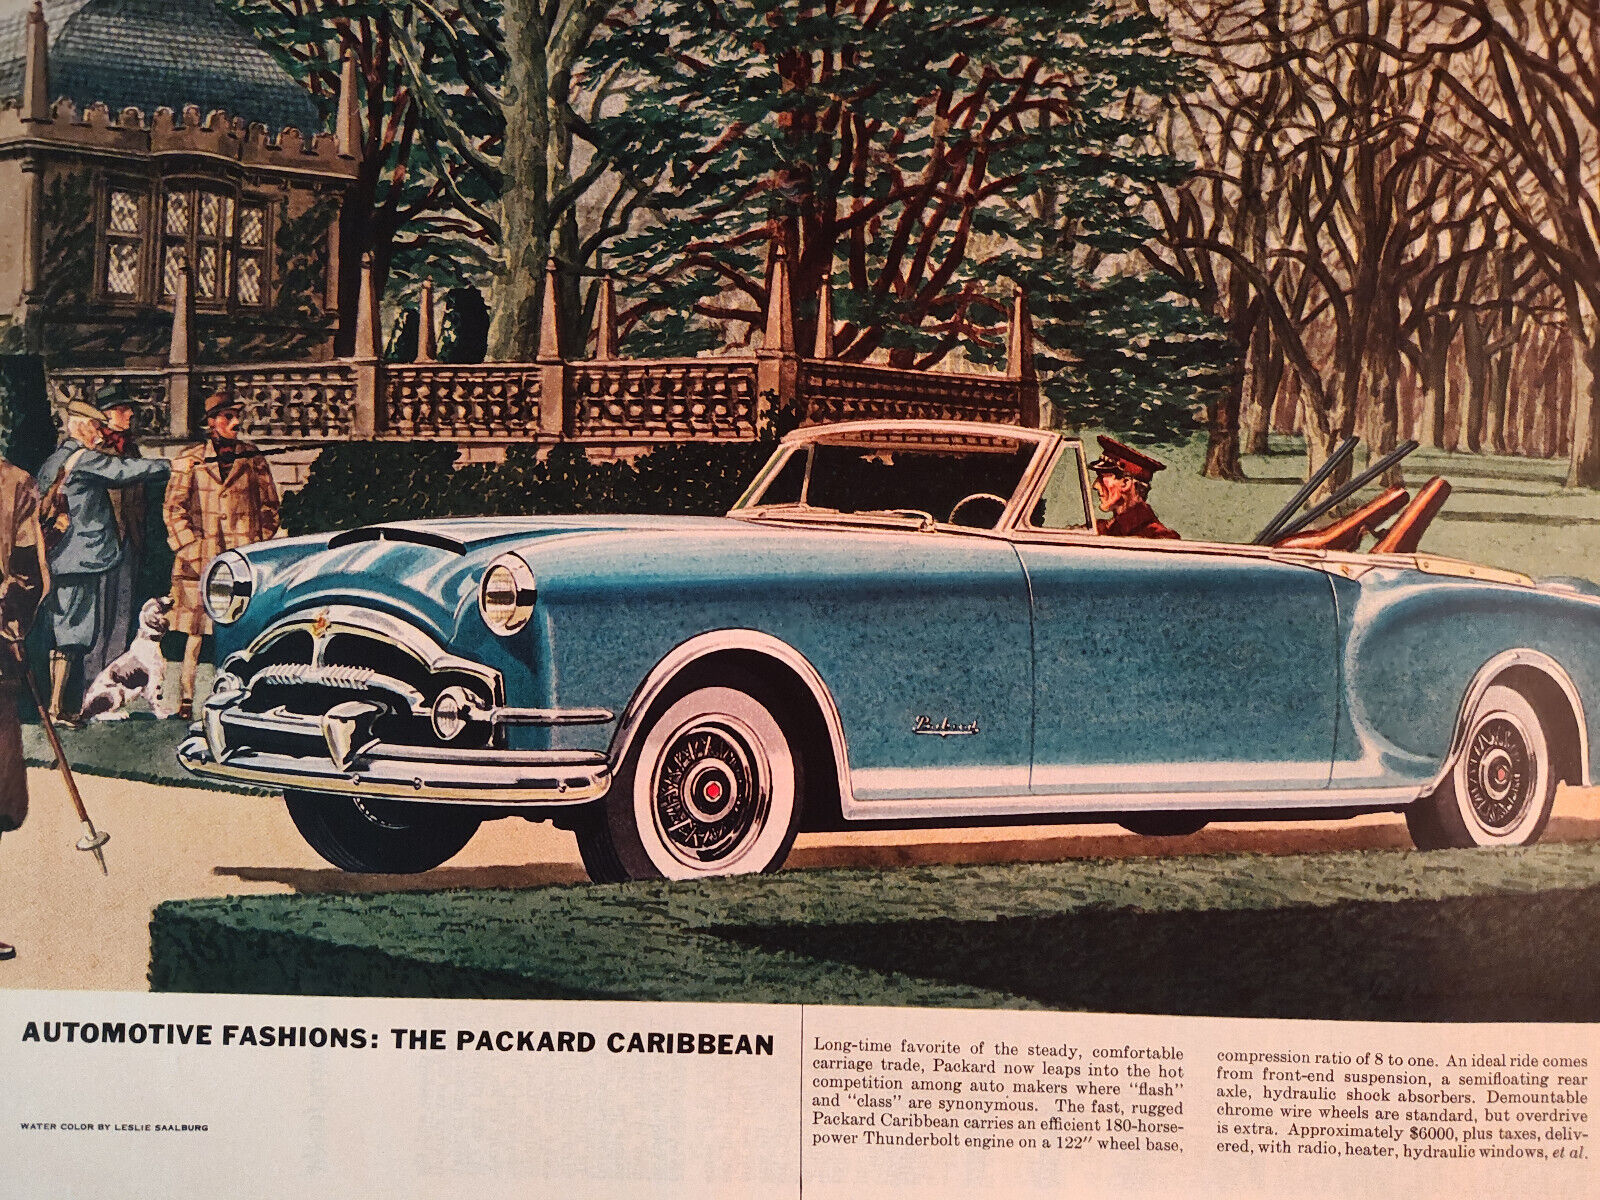 1953 Esquire Art Automotive Fashions Painting Leslie Staalburg PACKARD CARIBBEAN